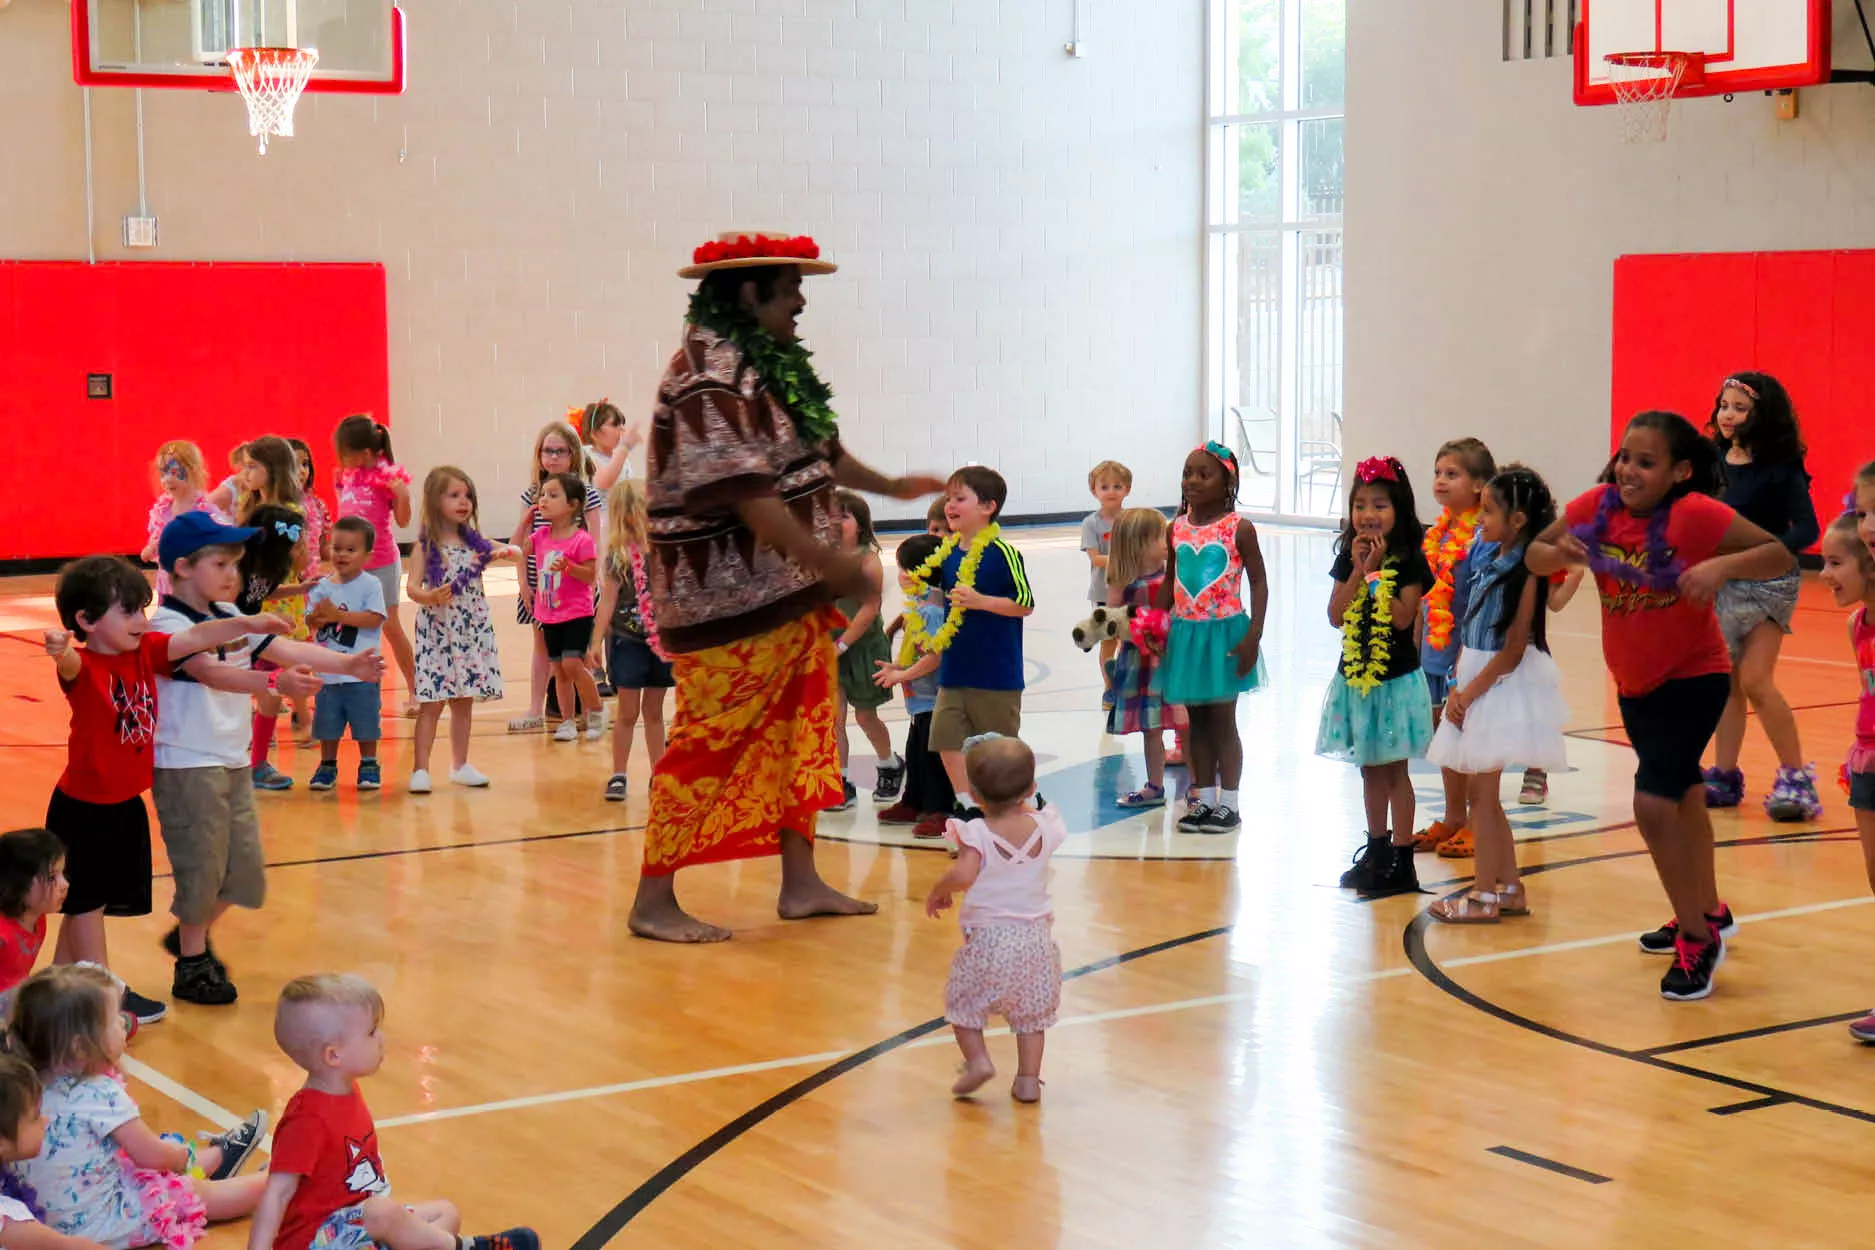 Man in Hawaiian clothing speaking to large group of children